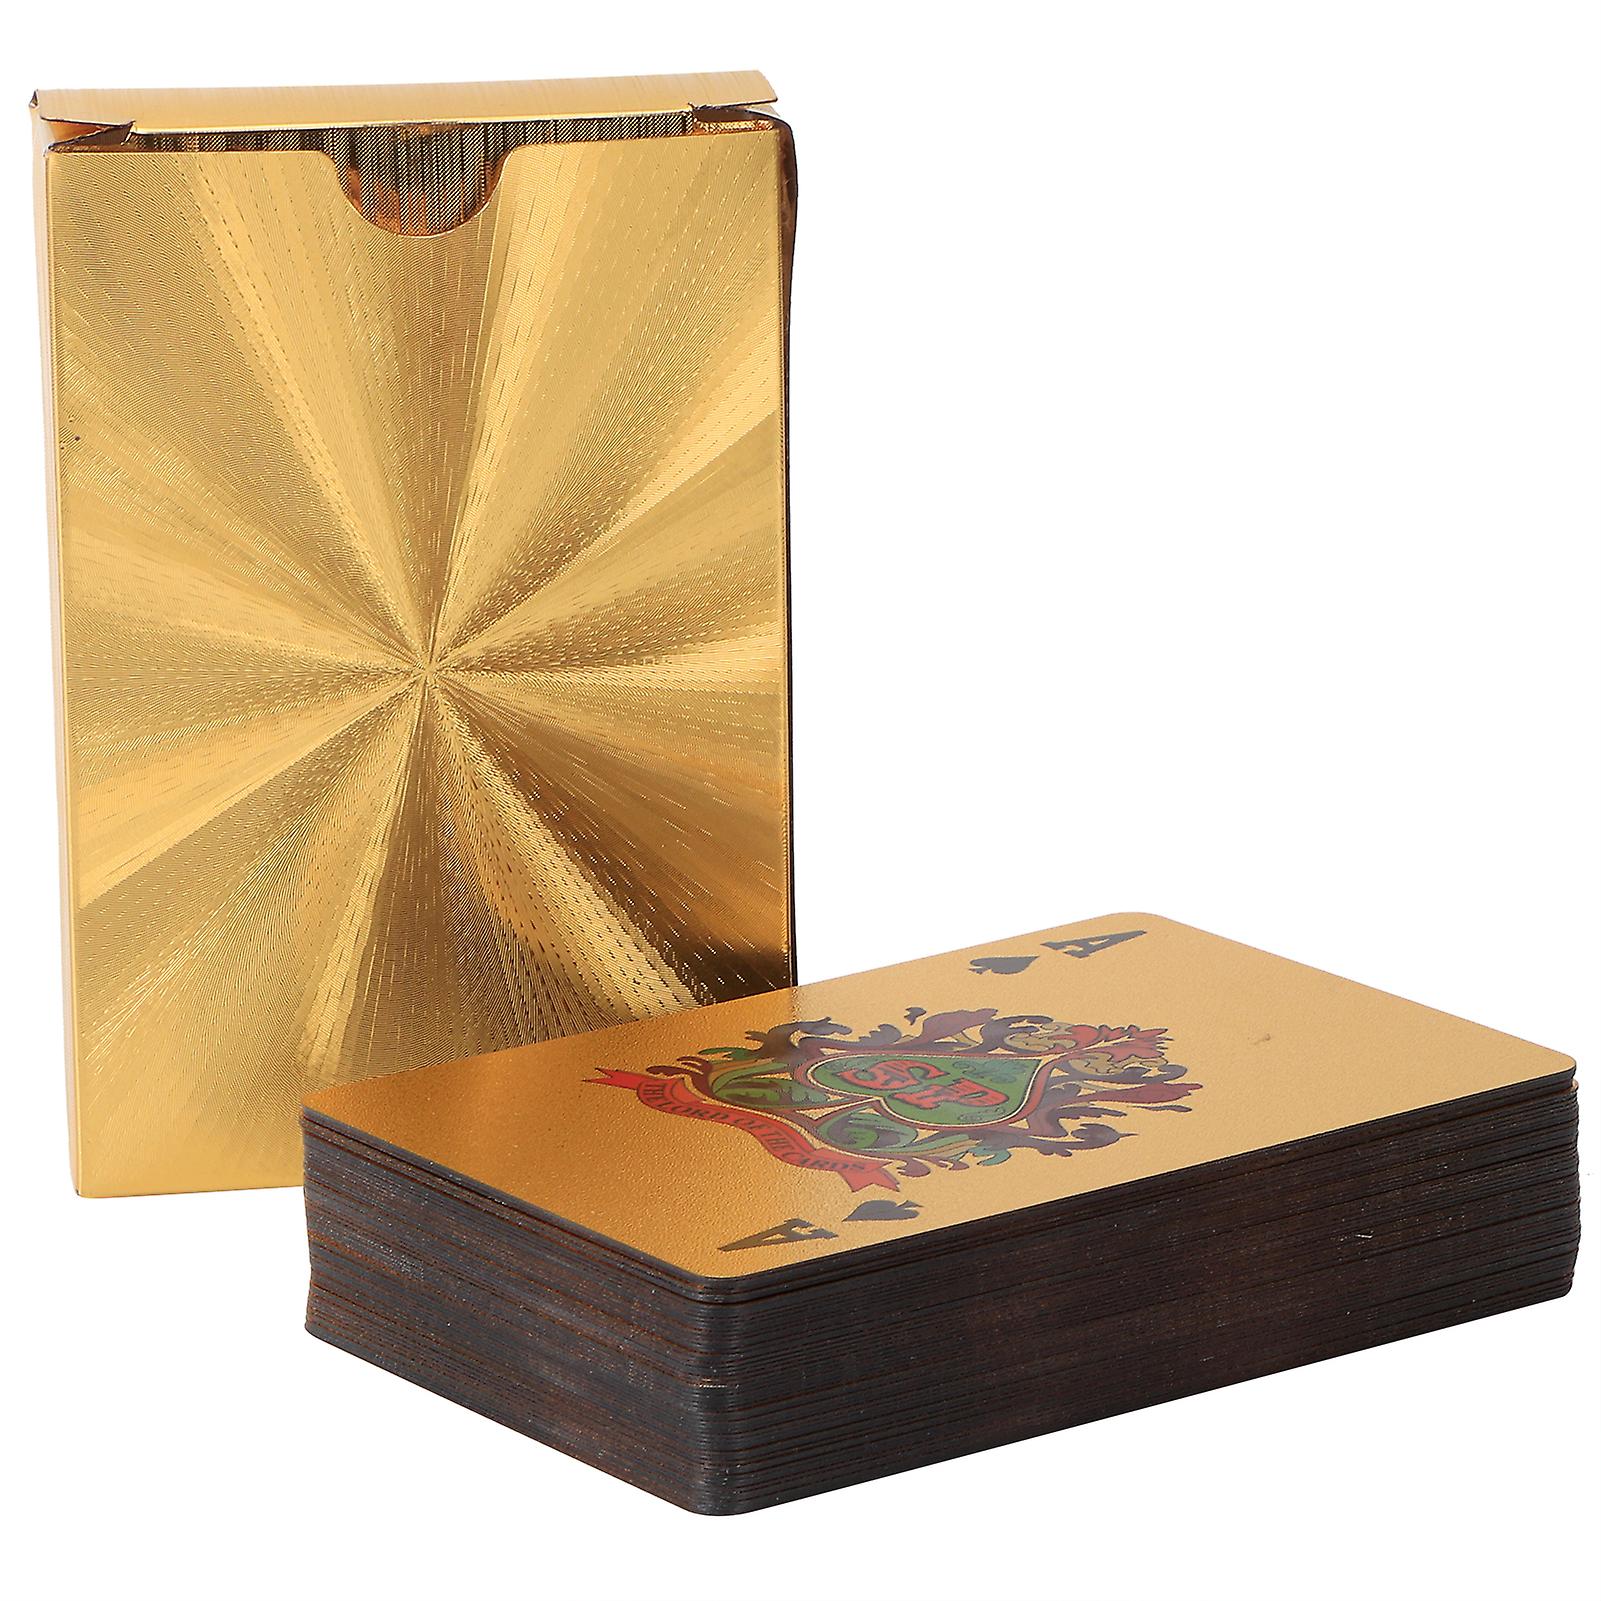 Waterproof Plastic Cards Set With Gold Foil Table Games For Party Beach Camping Leisure